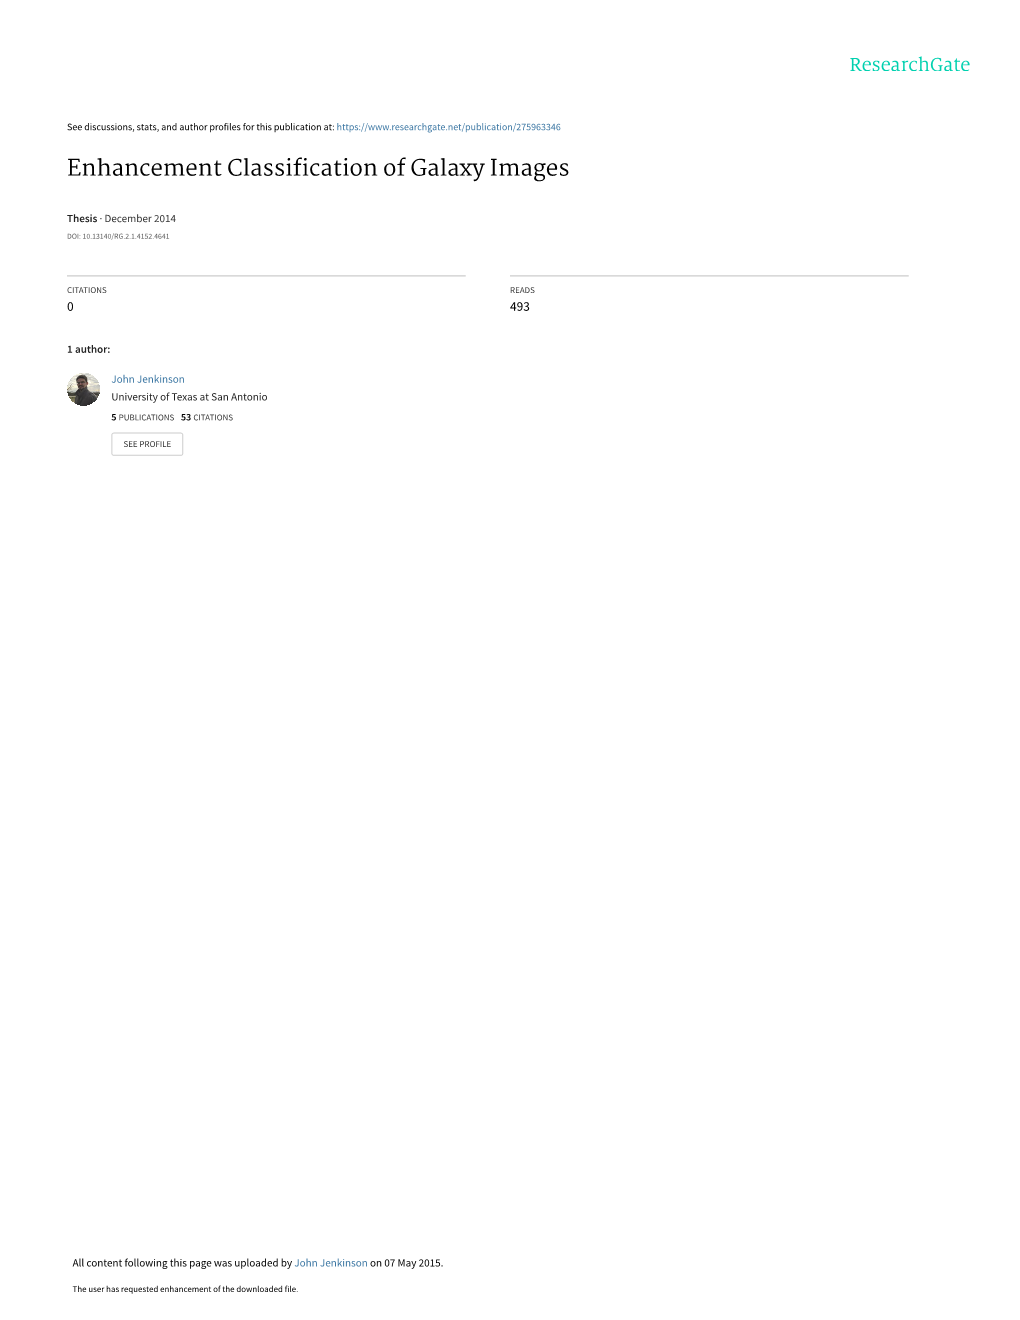 Enhancement Classification of Galaxy Images